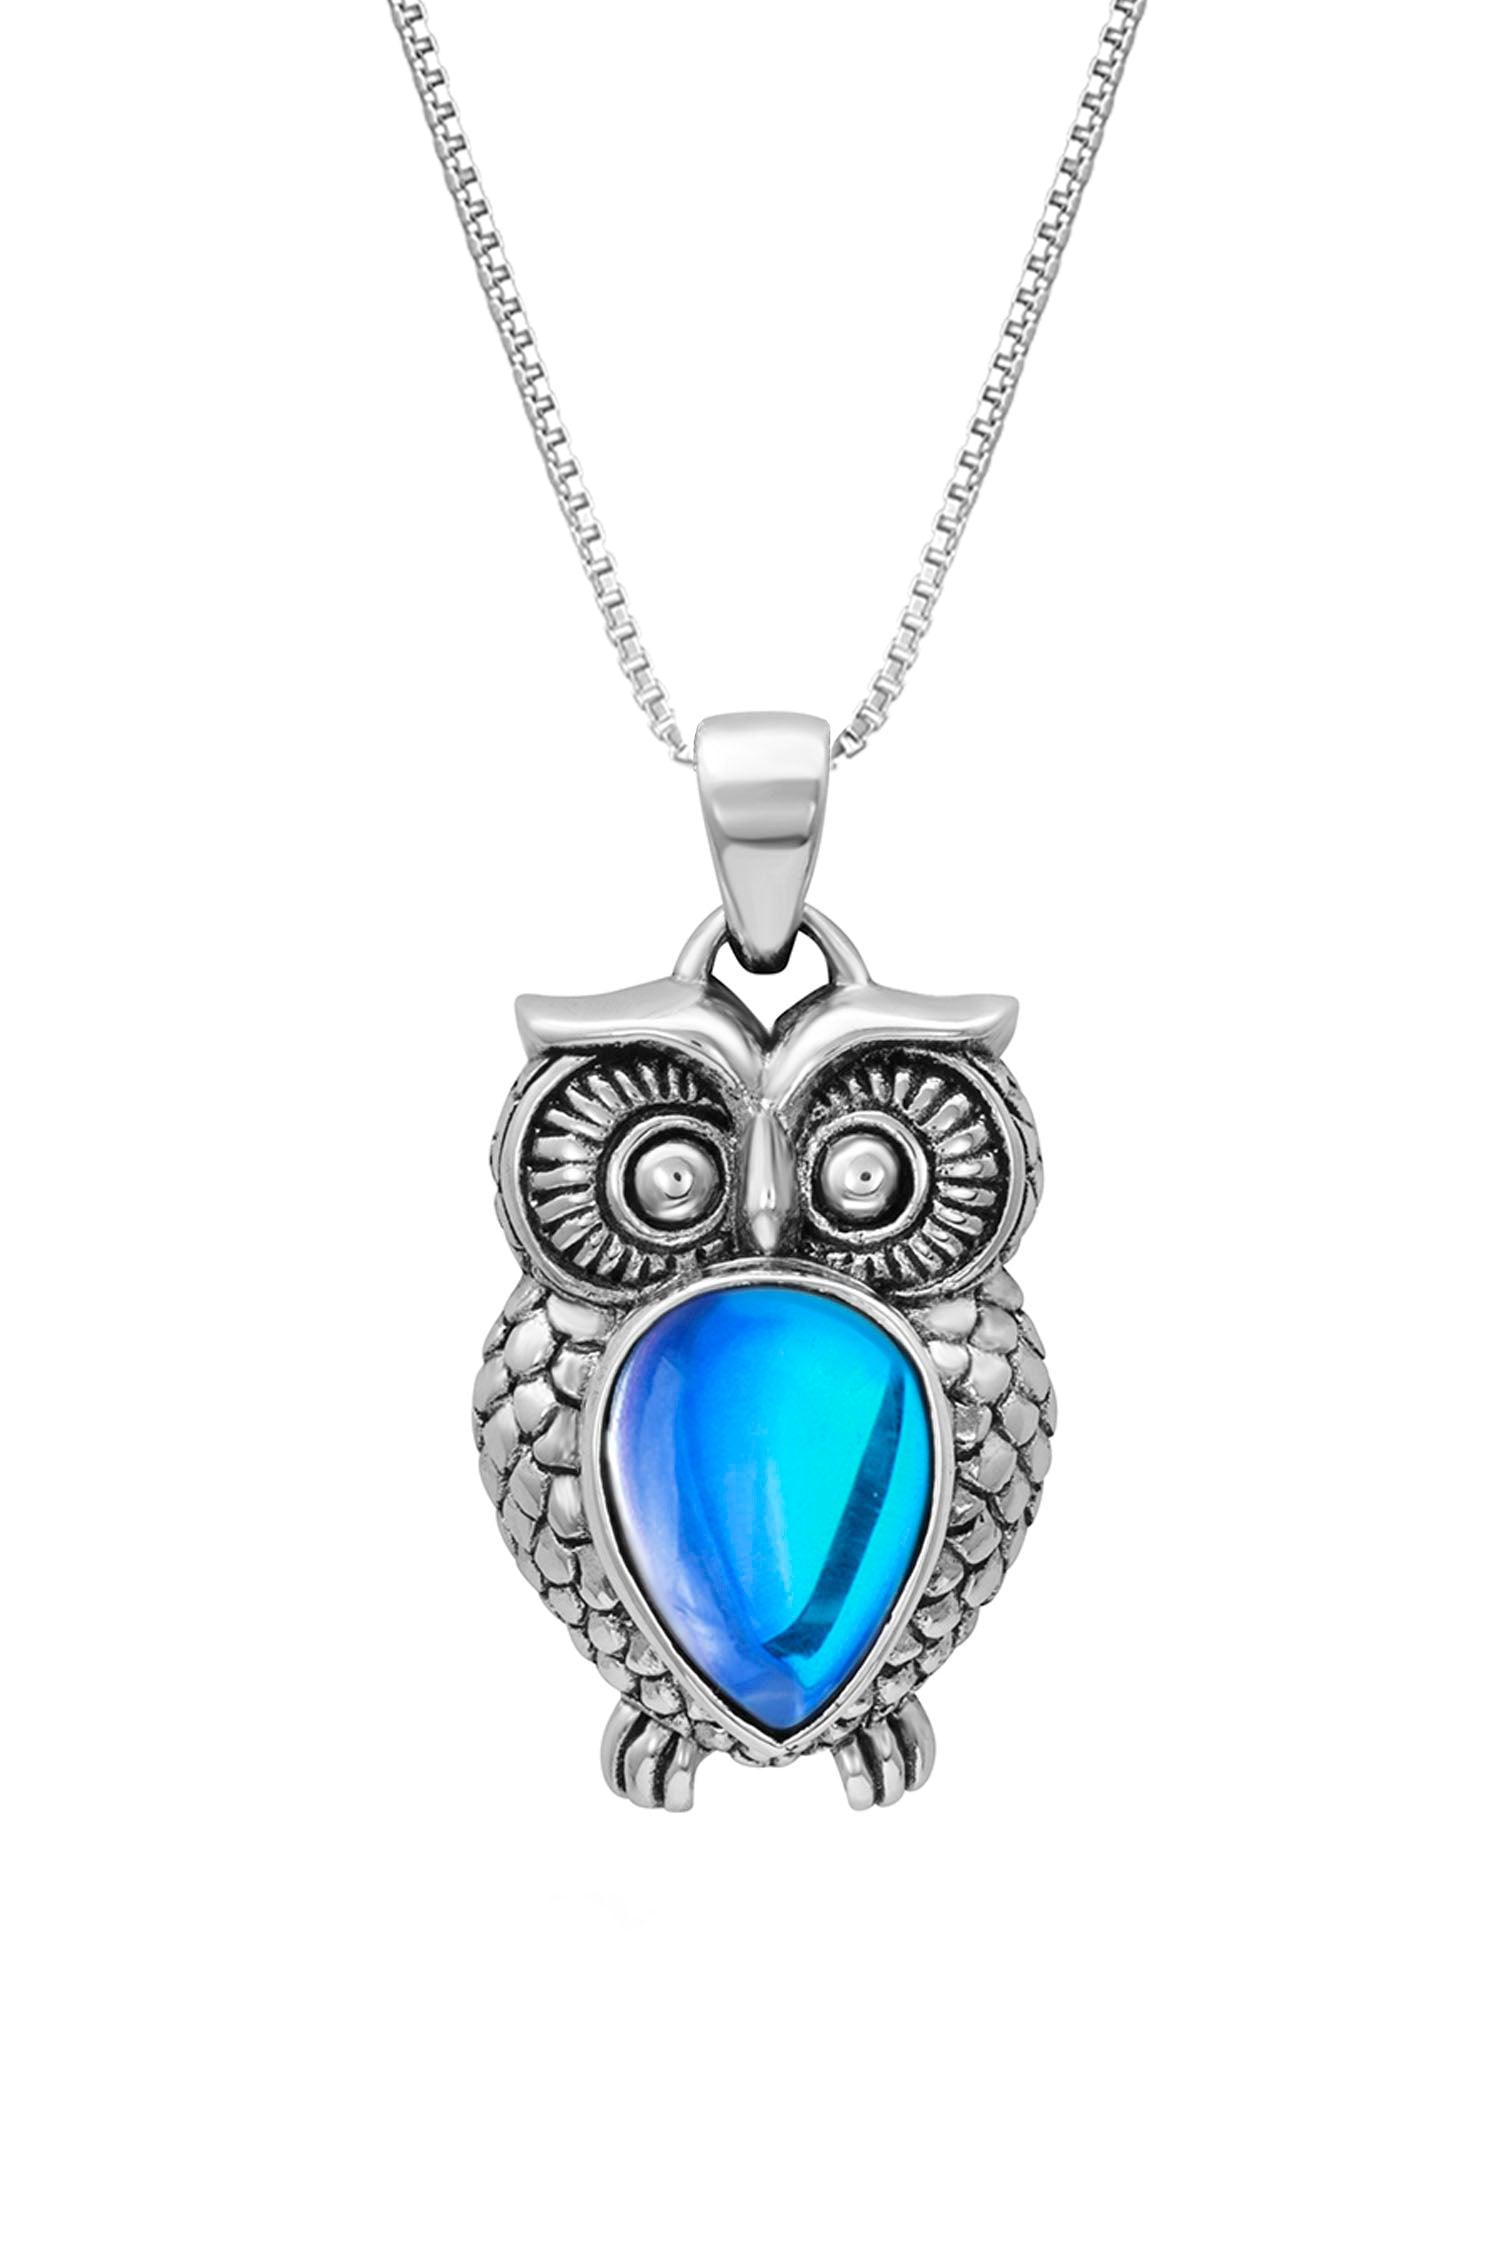 Sterling Silver Owl Pendant with Crystal Stone by LeightWorks